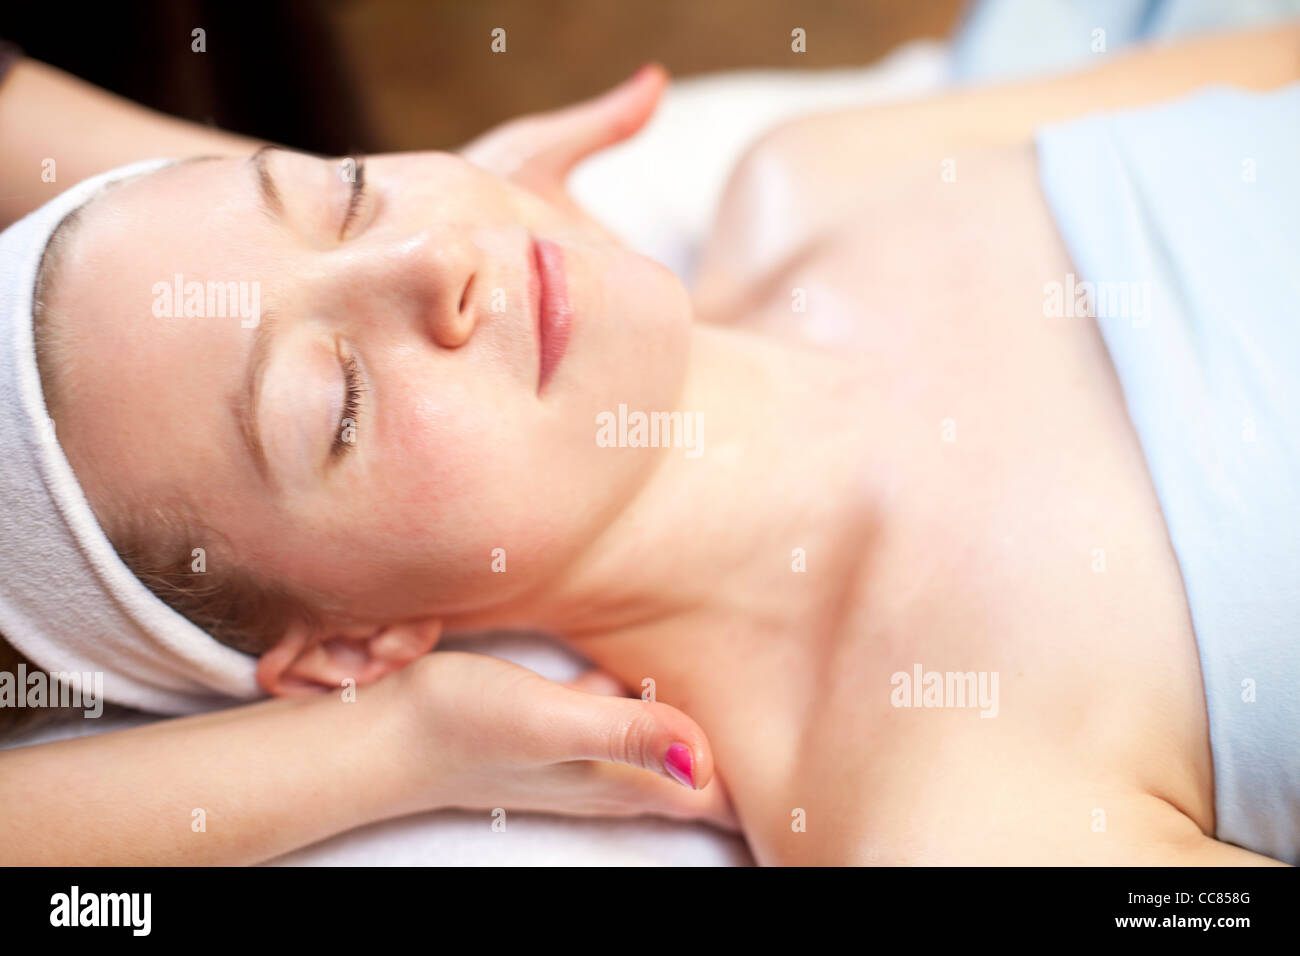 young woman receiving a back massage. Stock Photo